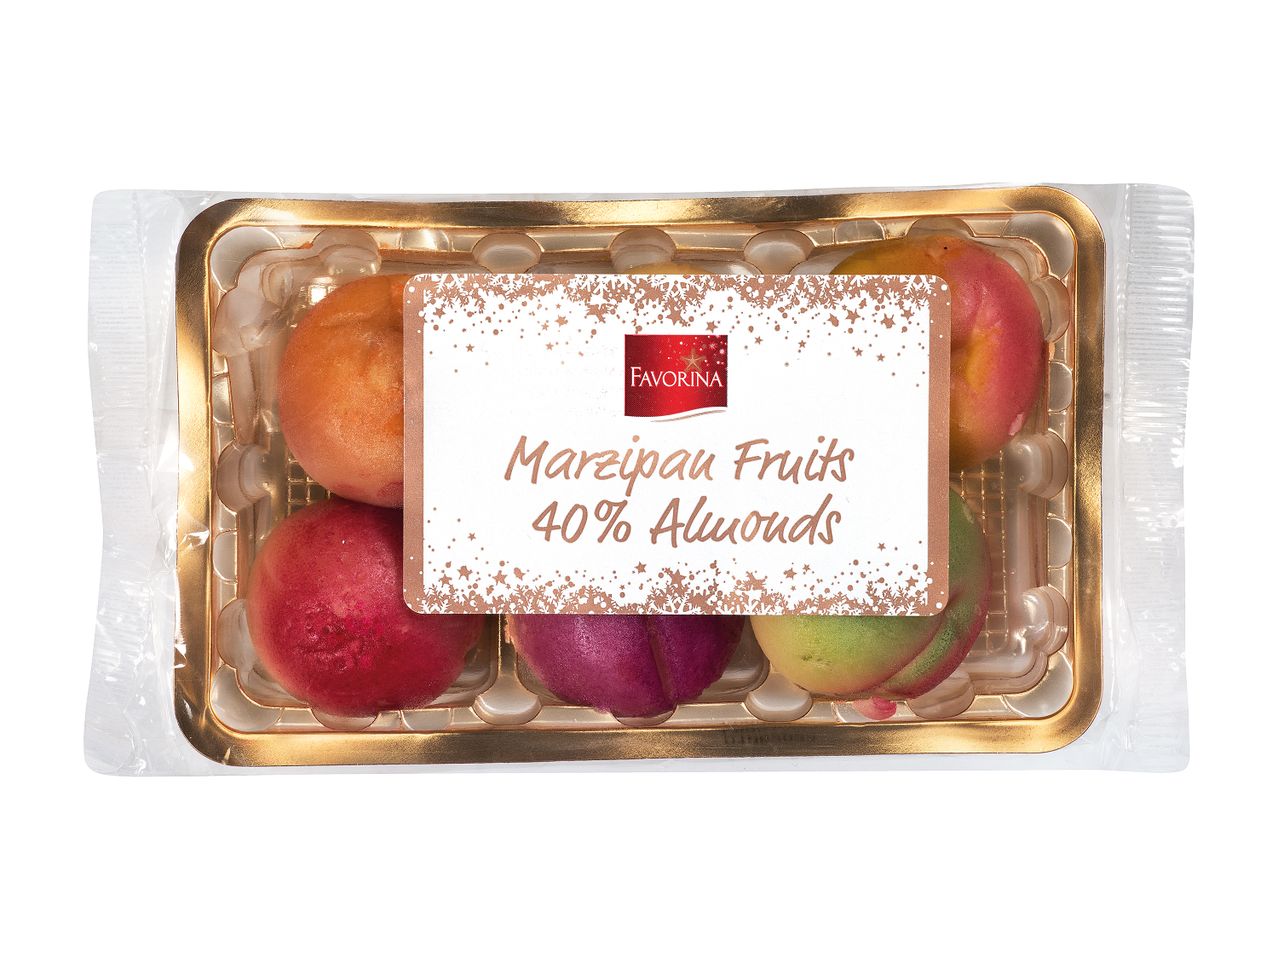 Go to full screen view: Favorina Marzipan Fruits Almonds - Image 1